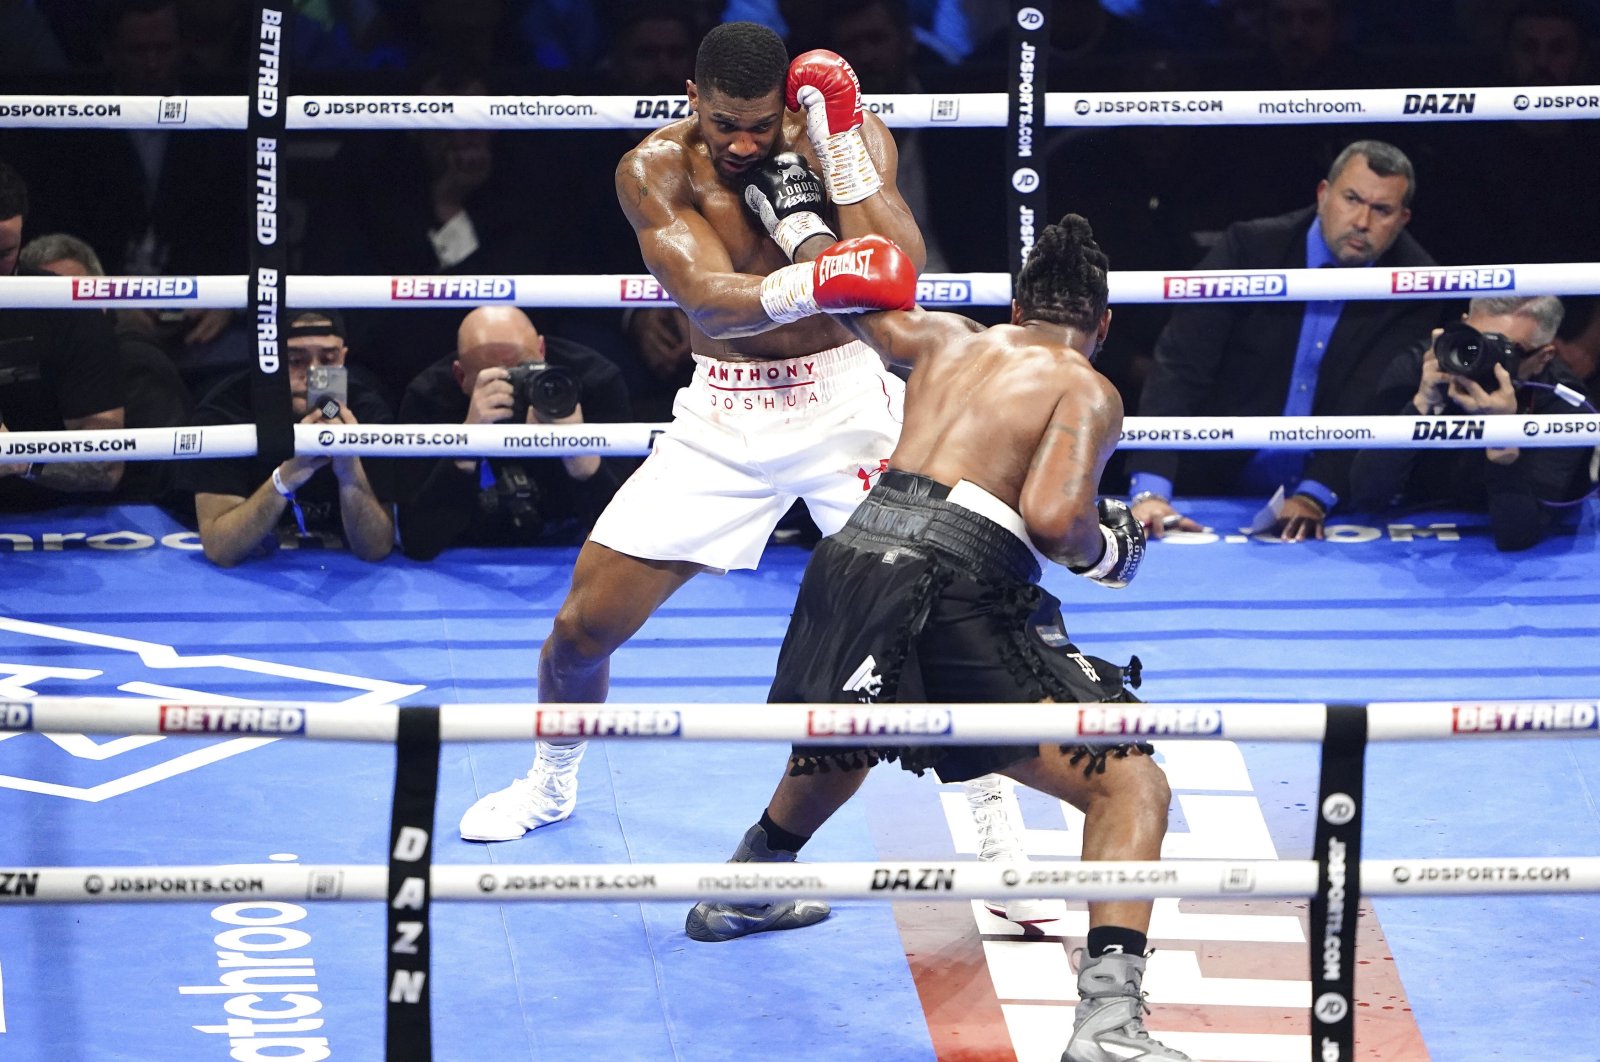 Jermaine Franklin, right, strikes Anthony Joshua during a heavyweight boxing match at The O2, London, UK., April 1, 2023. (AP Photo)